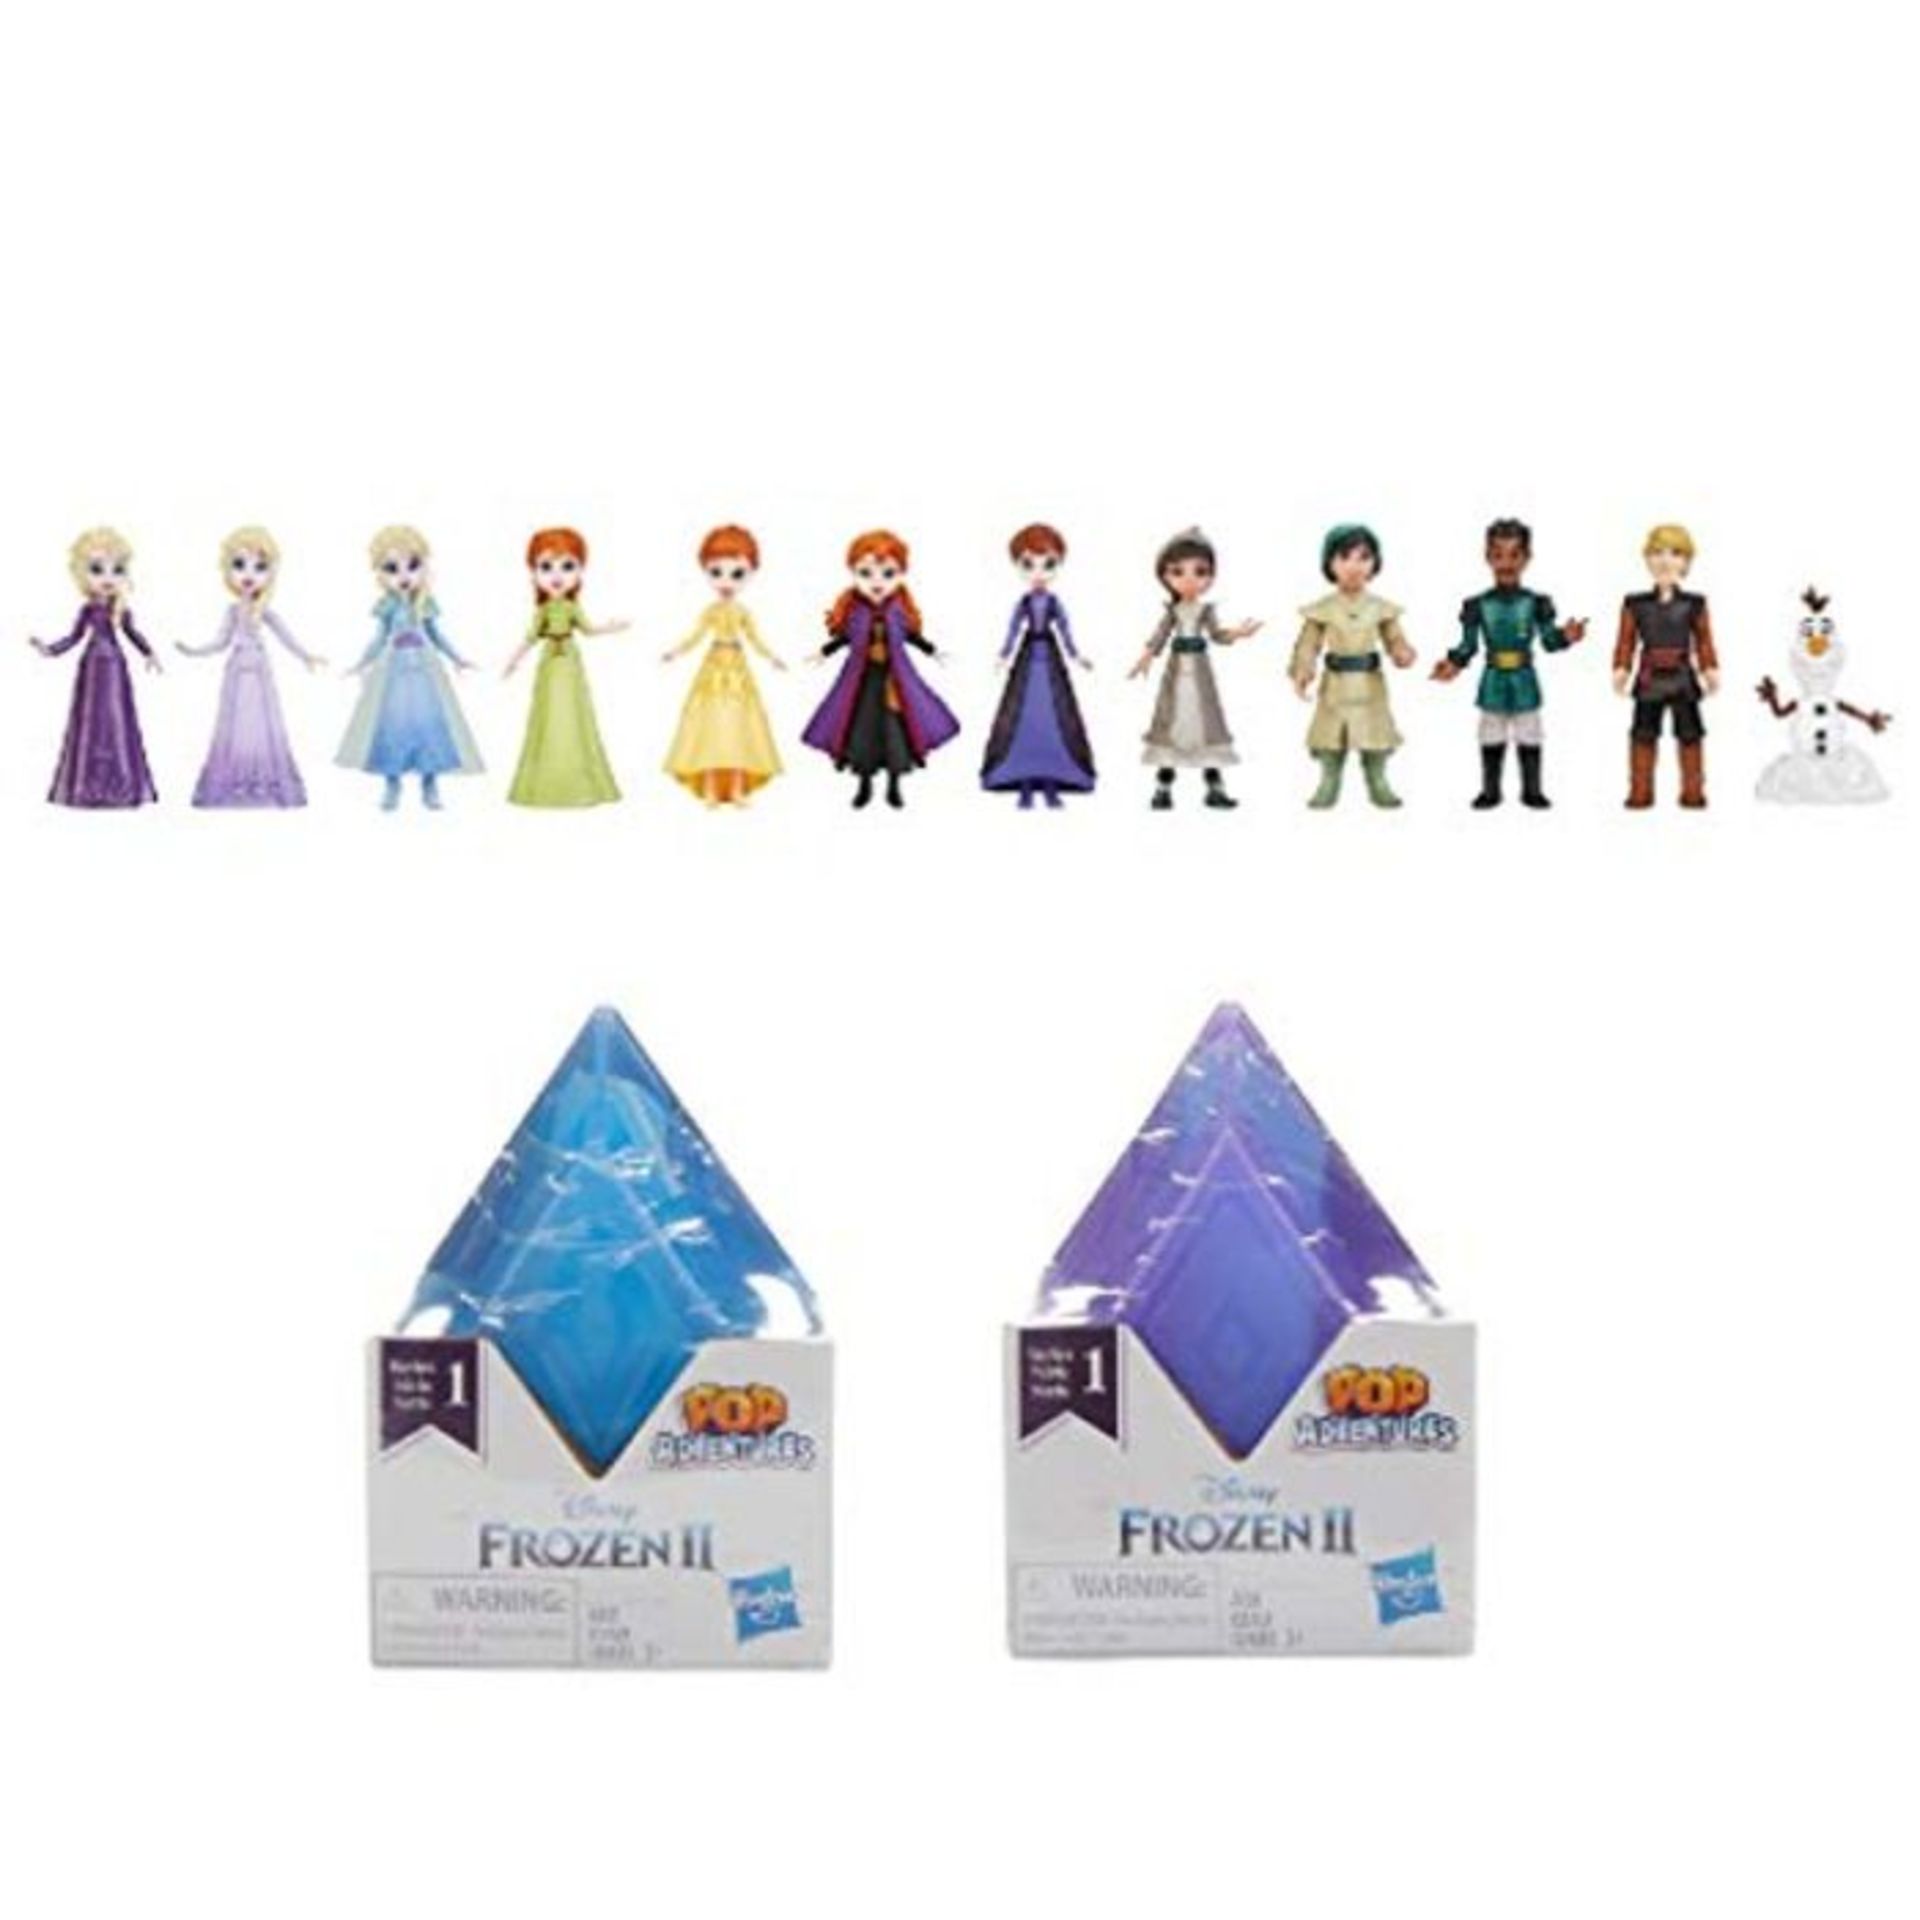 Disney Frozen 2 Pop Adventures Series 1 Surprise Blind Box With Crystal-Shaped Case an